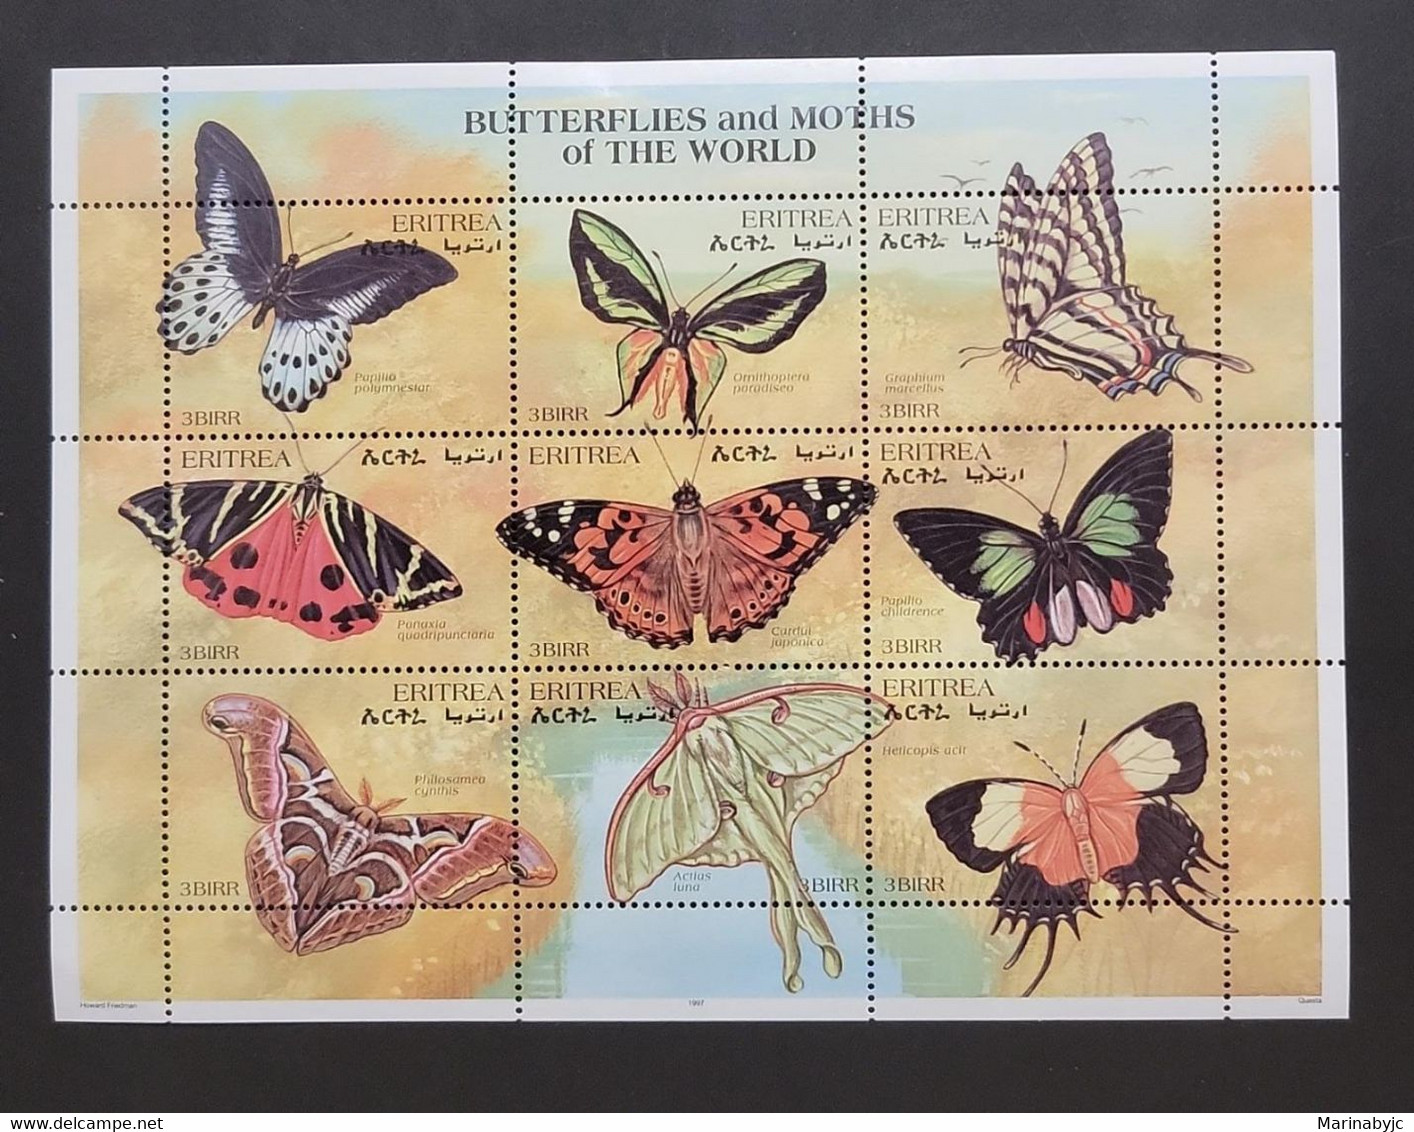 SP) 1997 ERITREA, BUTTERFLIES AND MOTHS OF THE WORLD, DIFFERENT SPECIES, COMPLETE SERIES, MNH - Eritrea